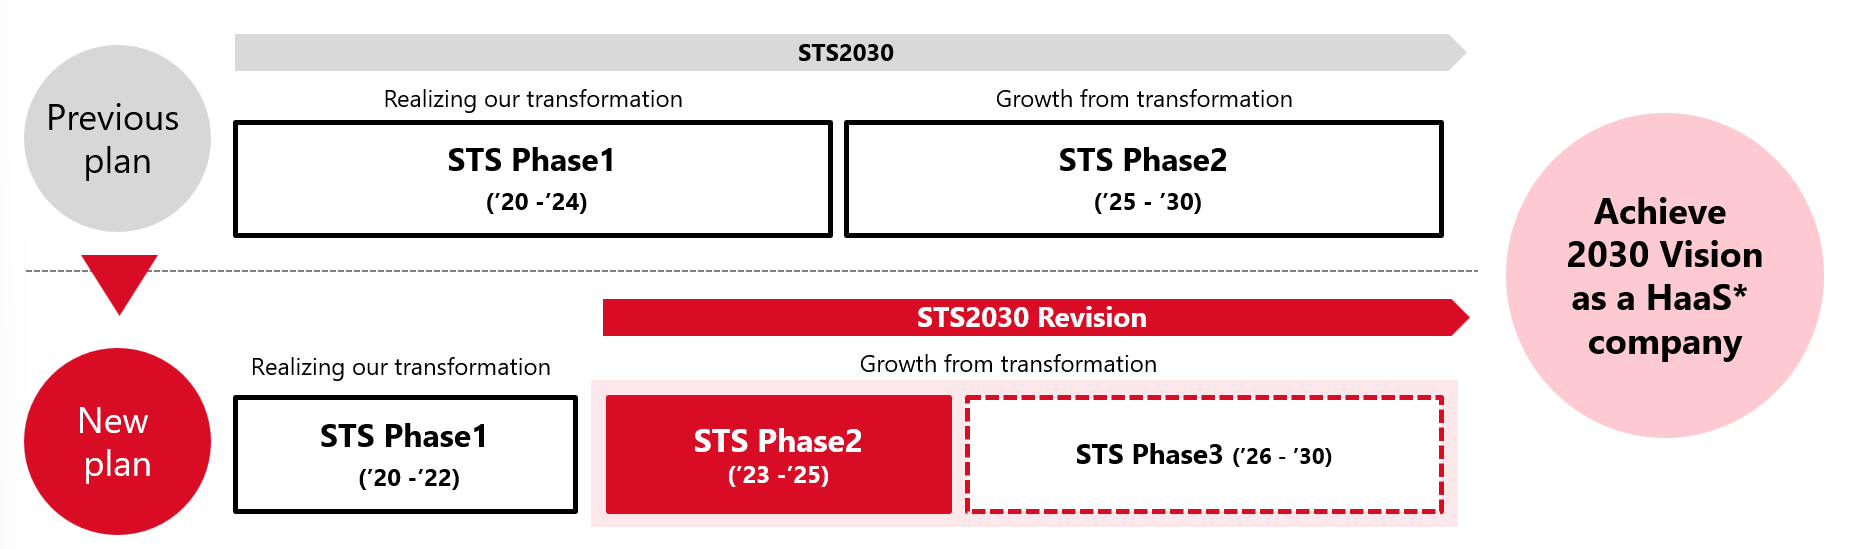 STS Phase１ strategy